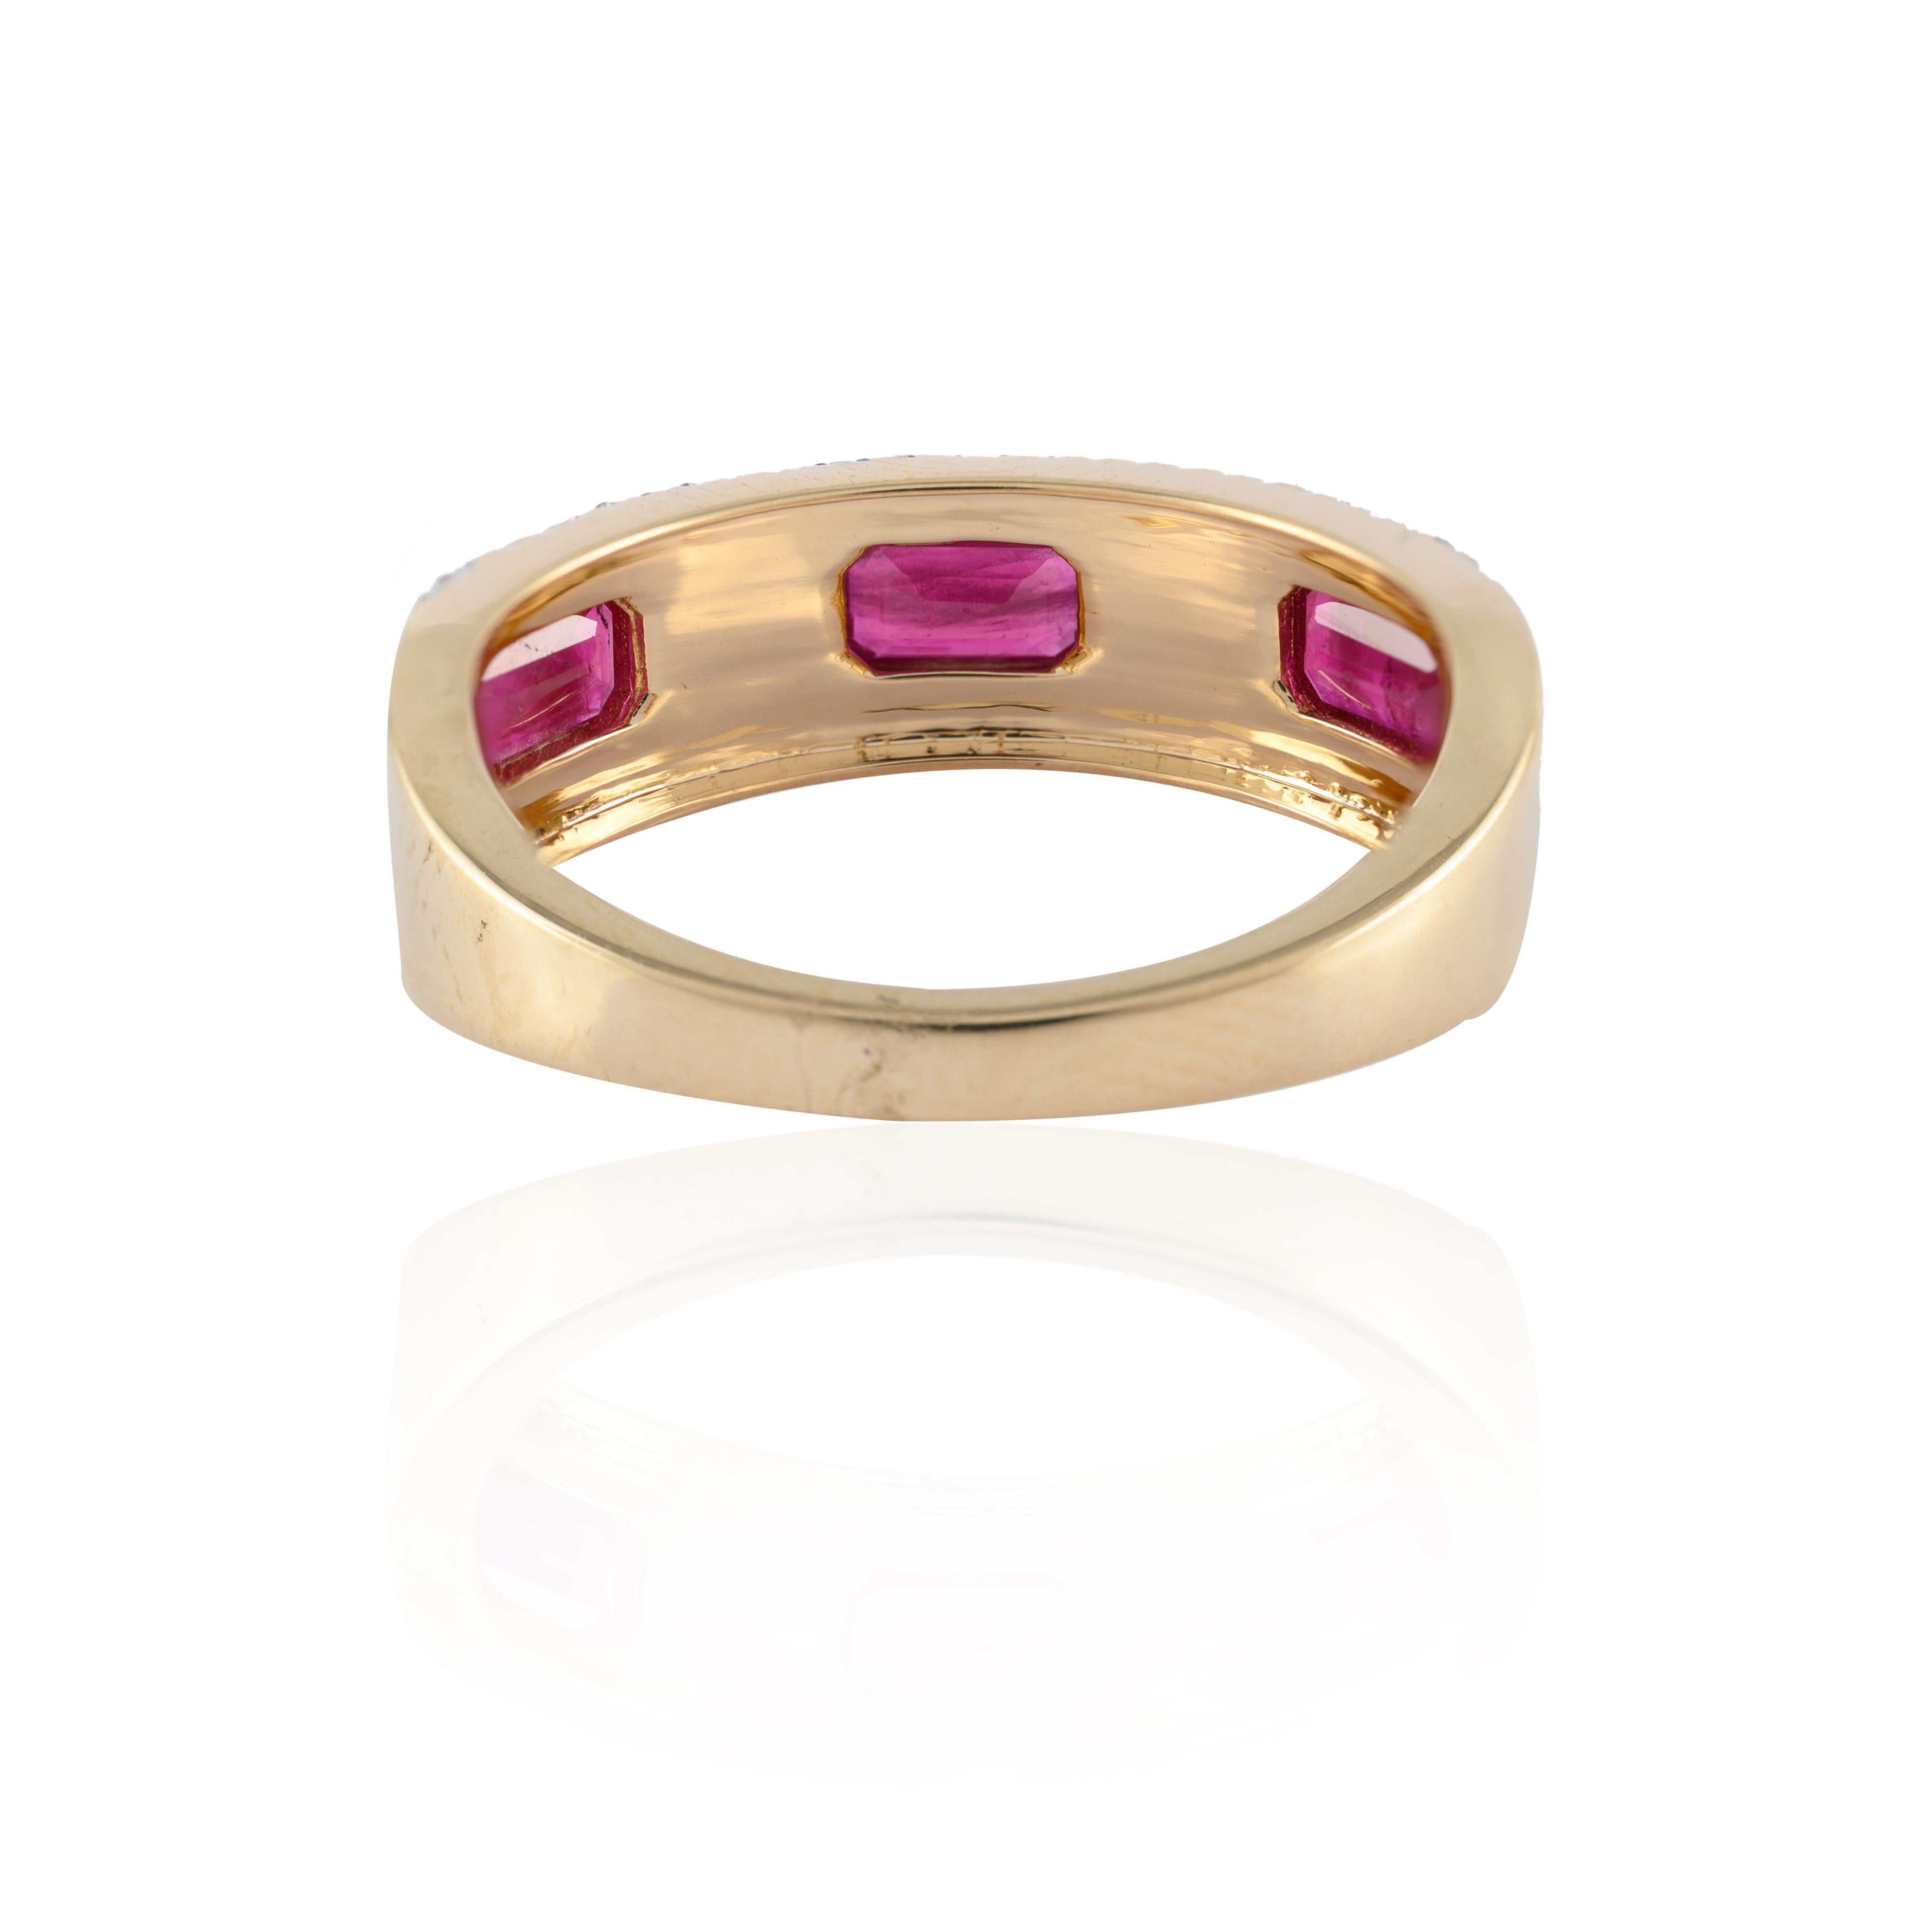 For Sale:  Statement Diamond Ruby Band Ring Gift for Him in 14k Solid Yellow Gold 4